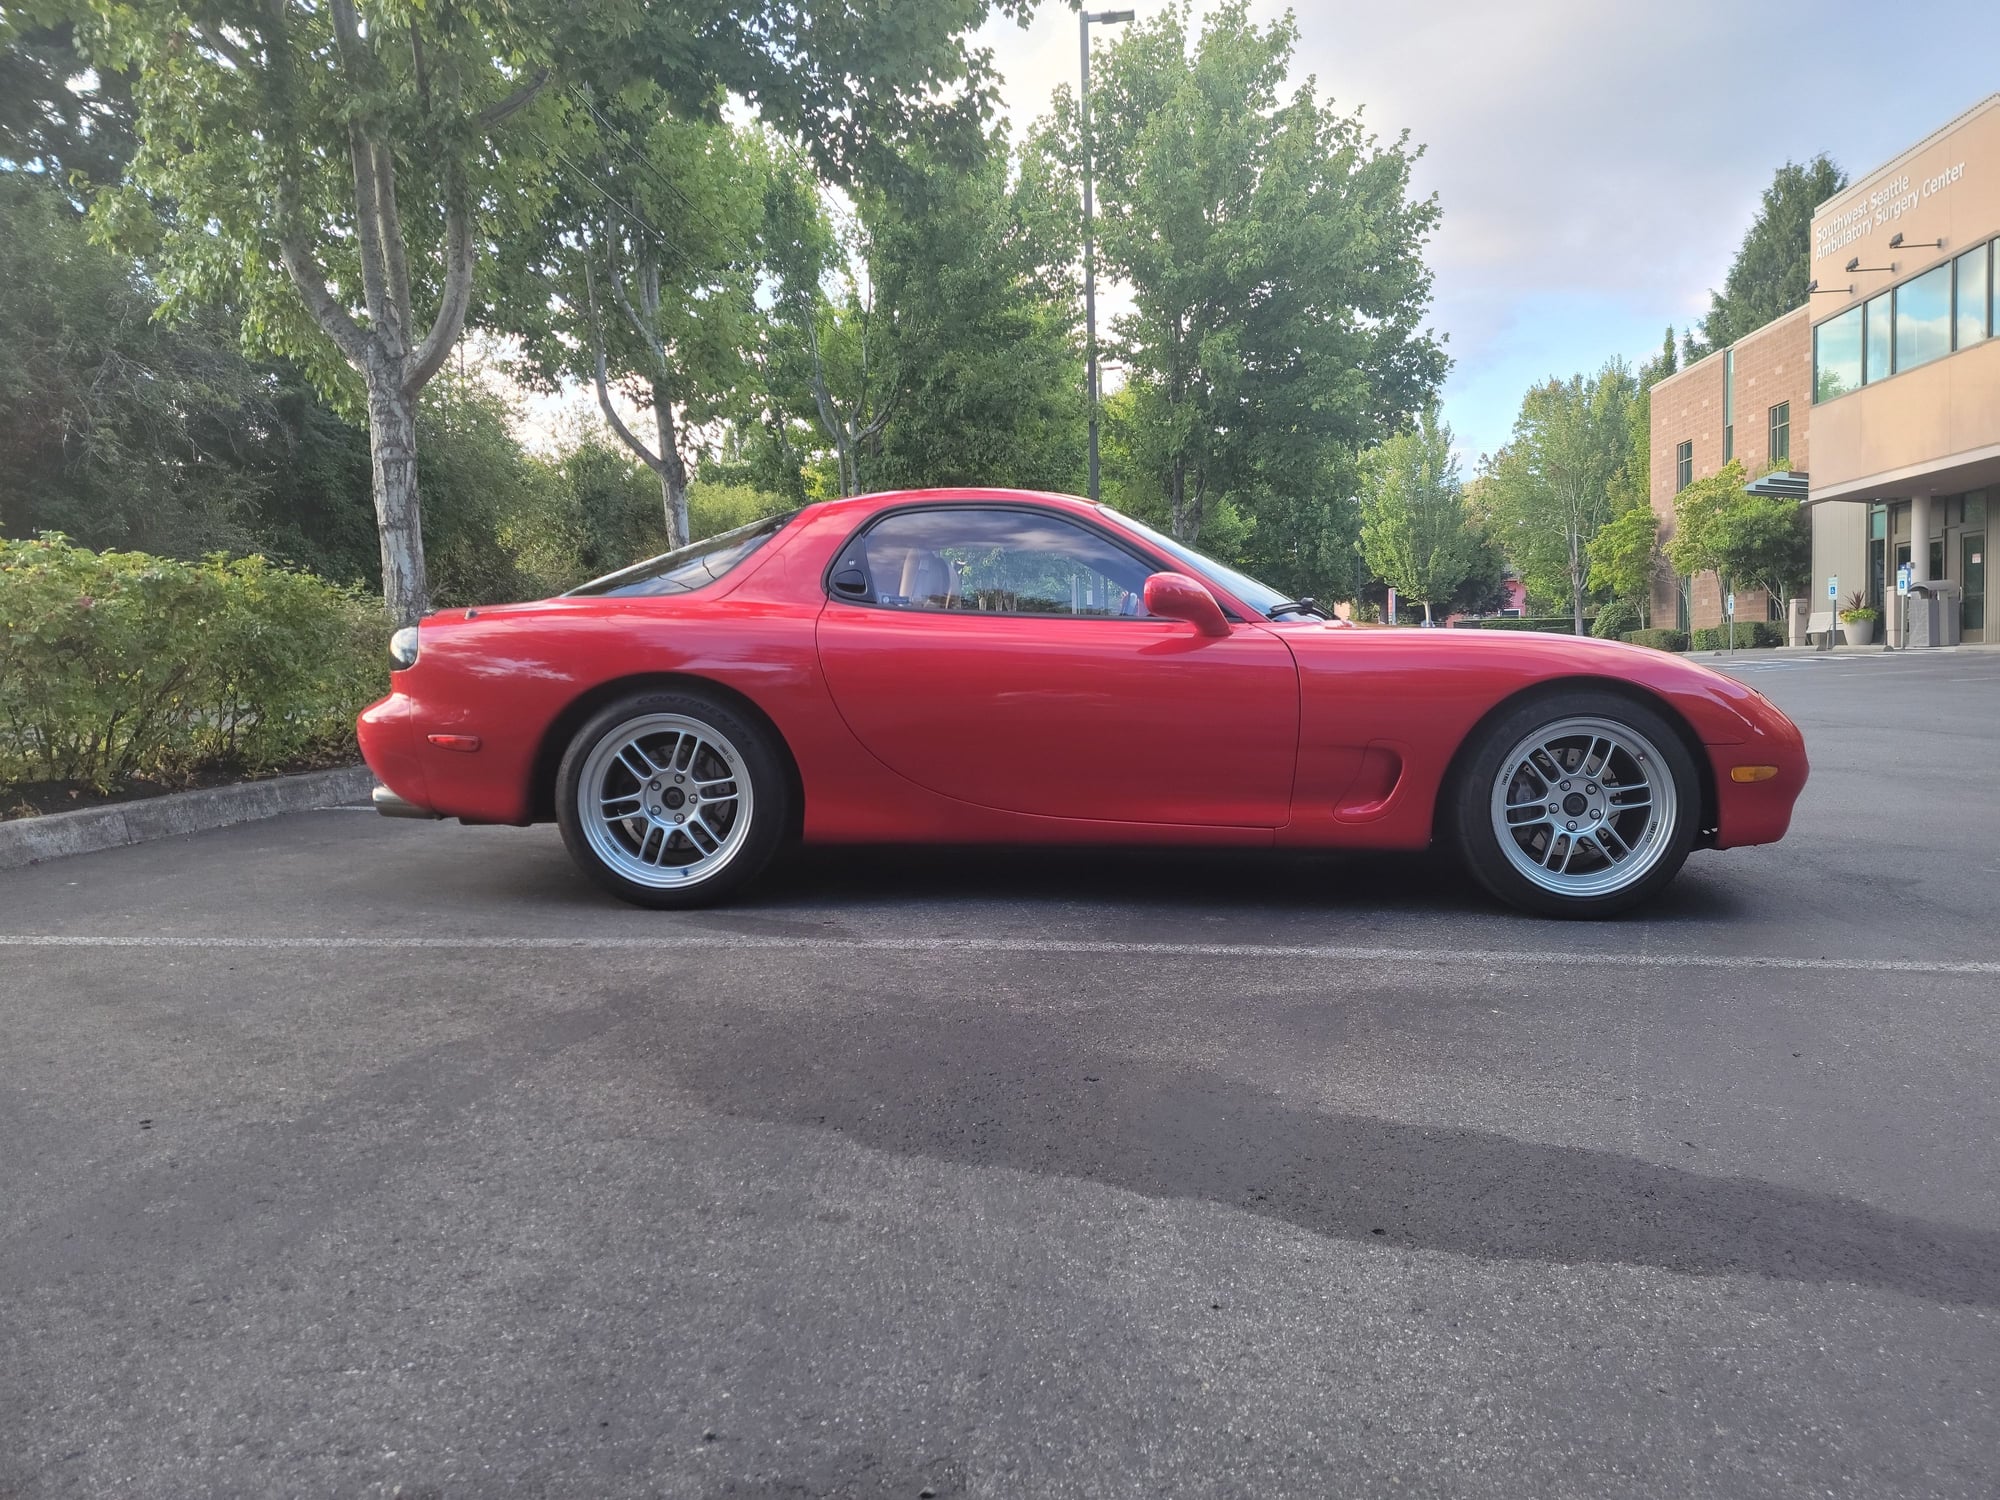 1993 Mazda RX-7 - Wts 1993 fd rx-7 30k obo - Used - VIN JM1FD3312P0205401 - 155,080 Miles - 2 cyl - 2WD - Automatic - Coupe - Red - Burien, WA 98166, United States